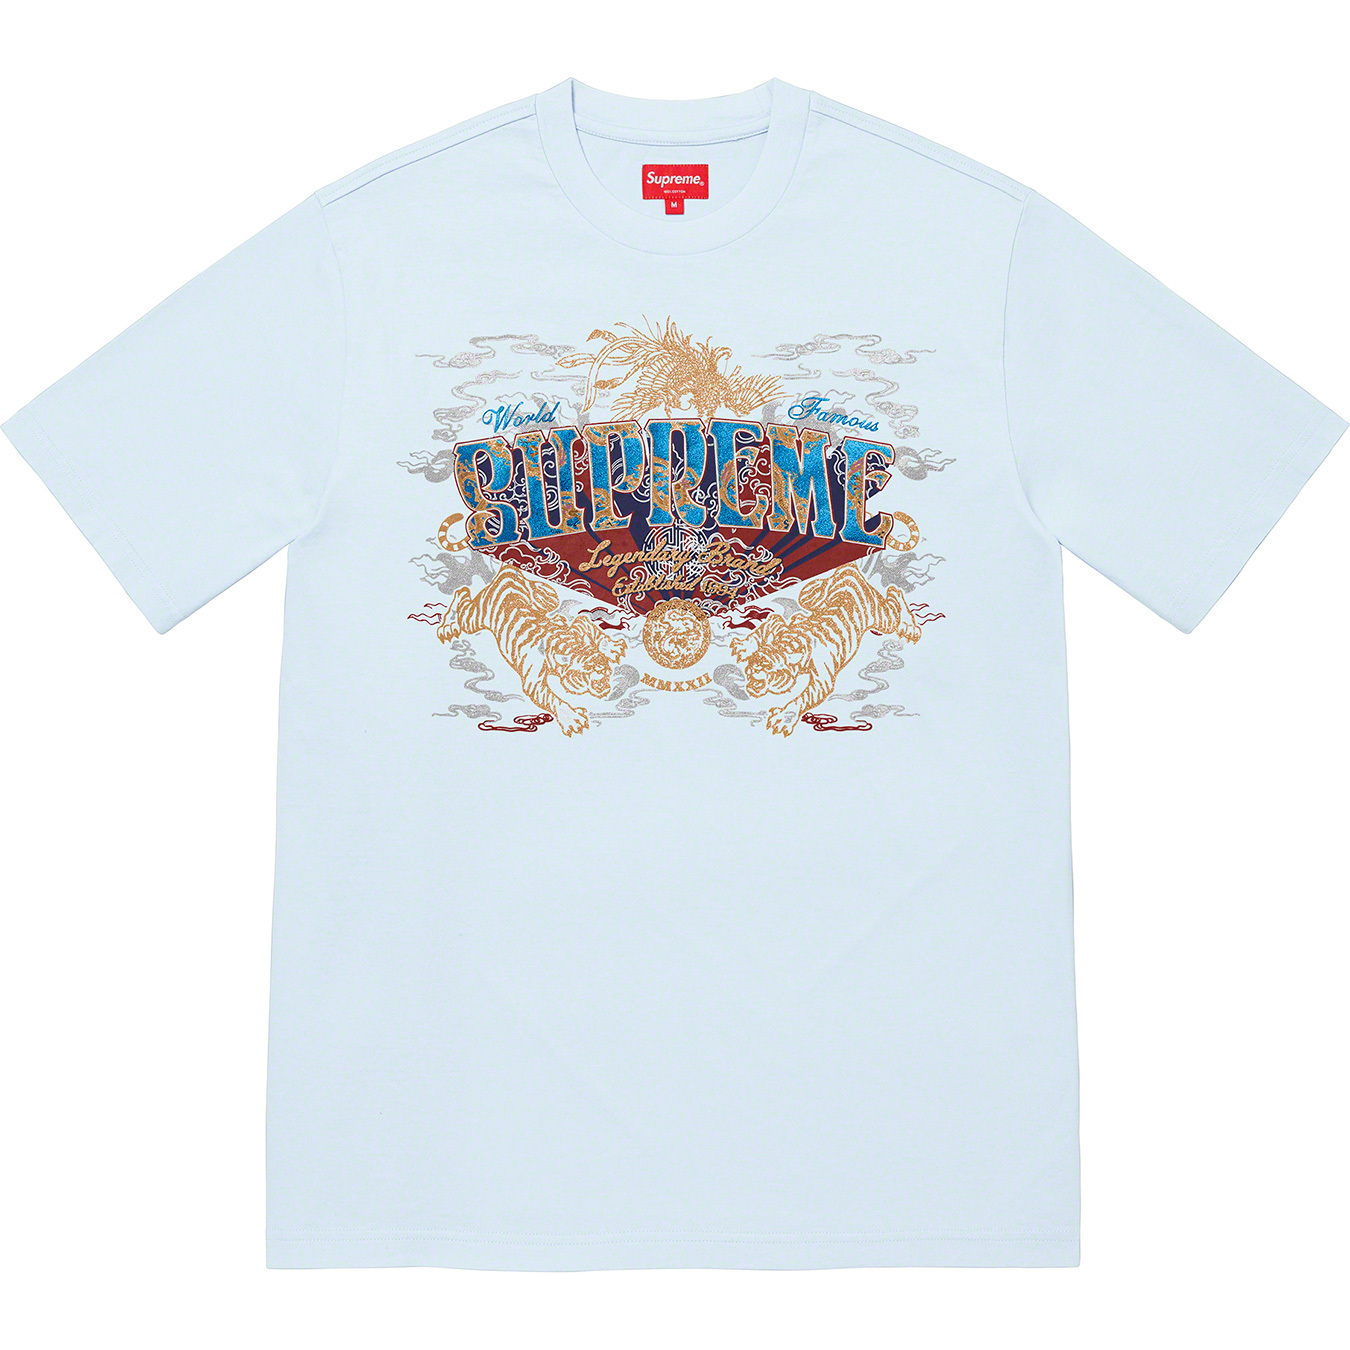 Supreme Special Offer S/S Top Lサイズ 新品未開封